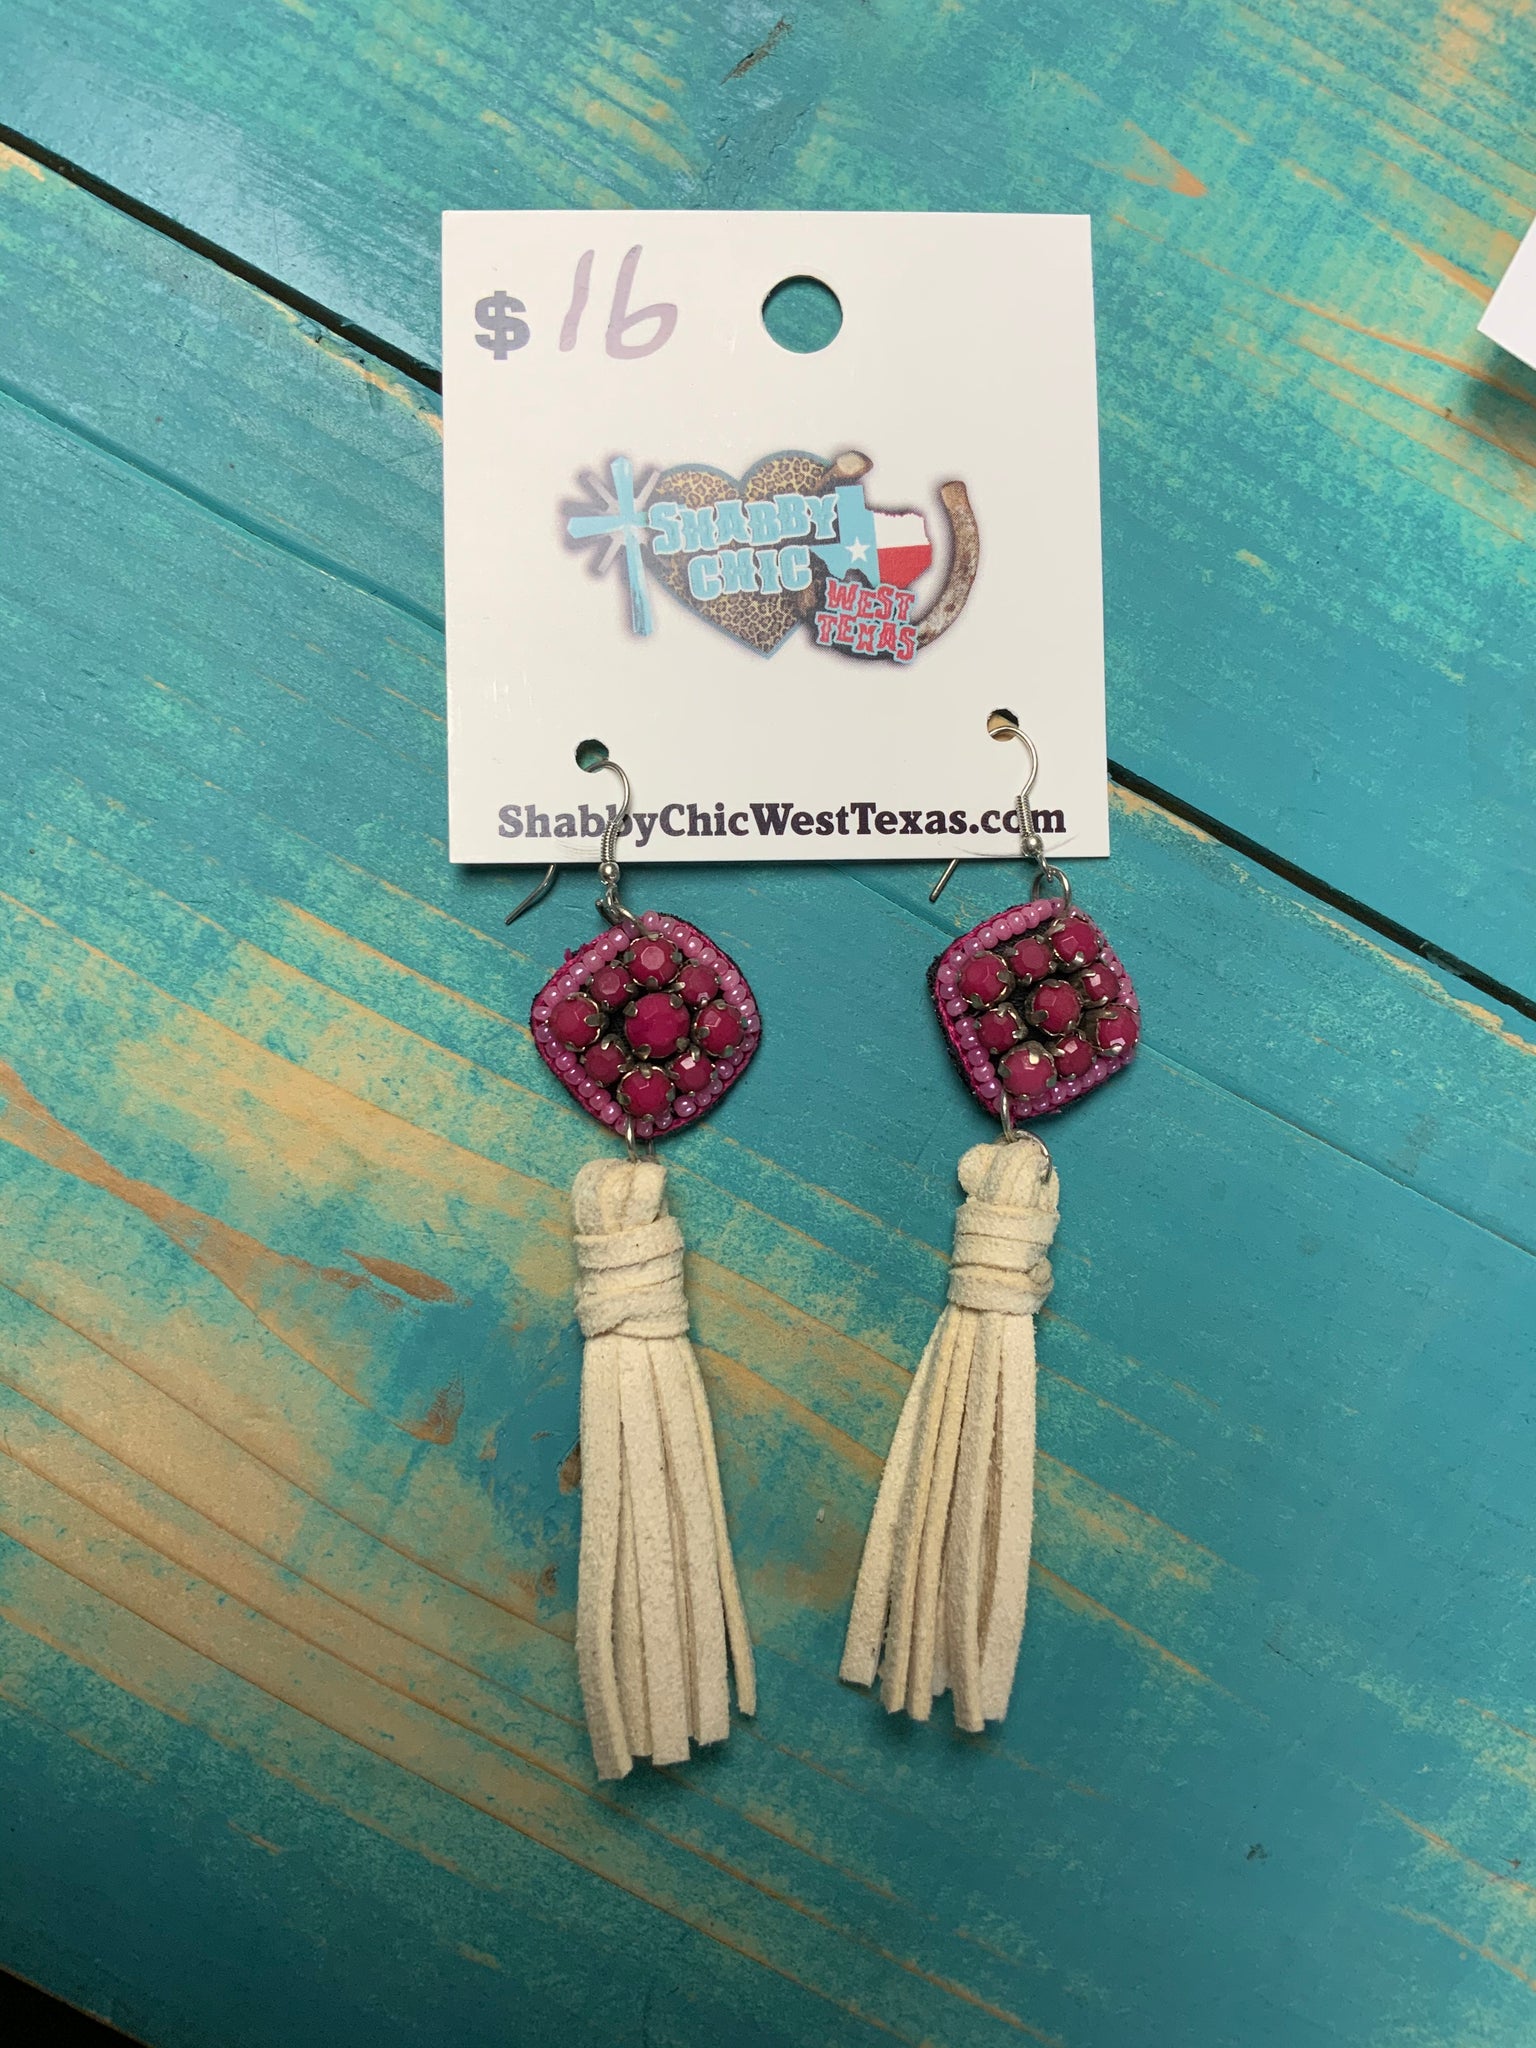 Bling square earrings with fringe multiple colors